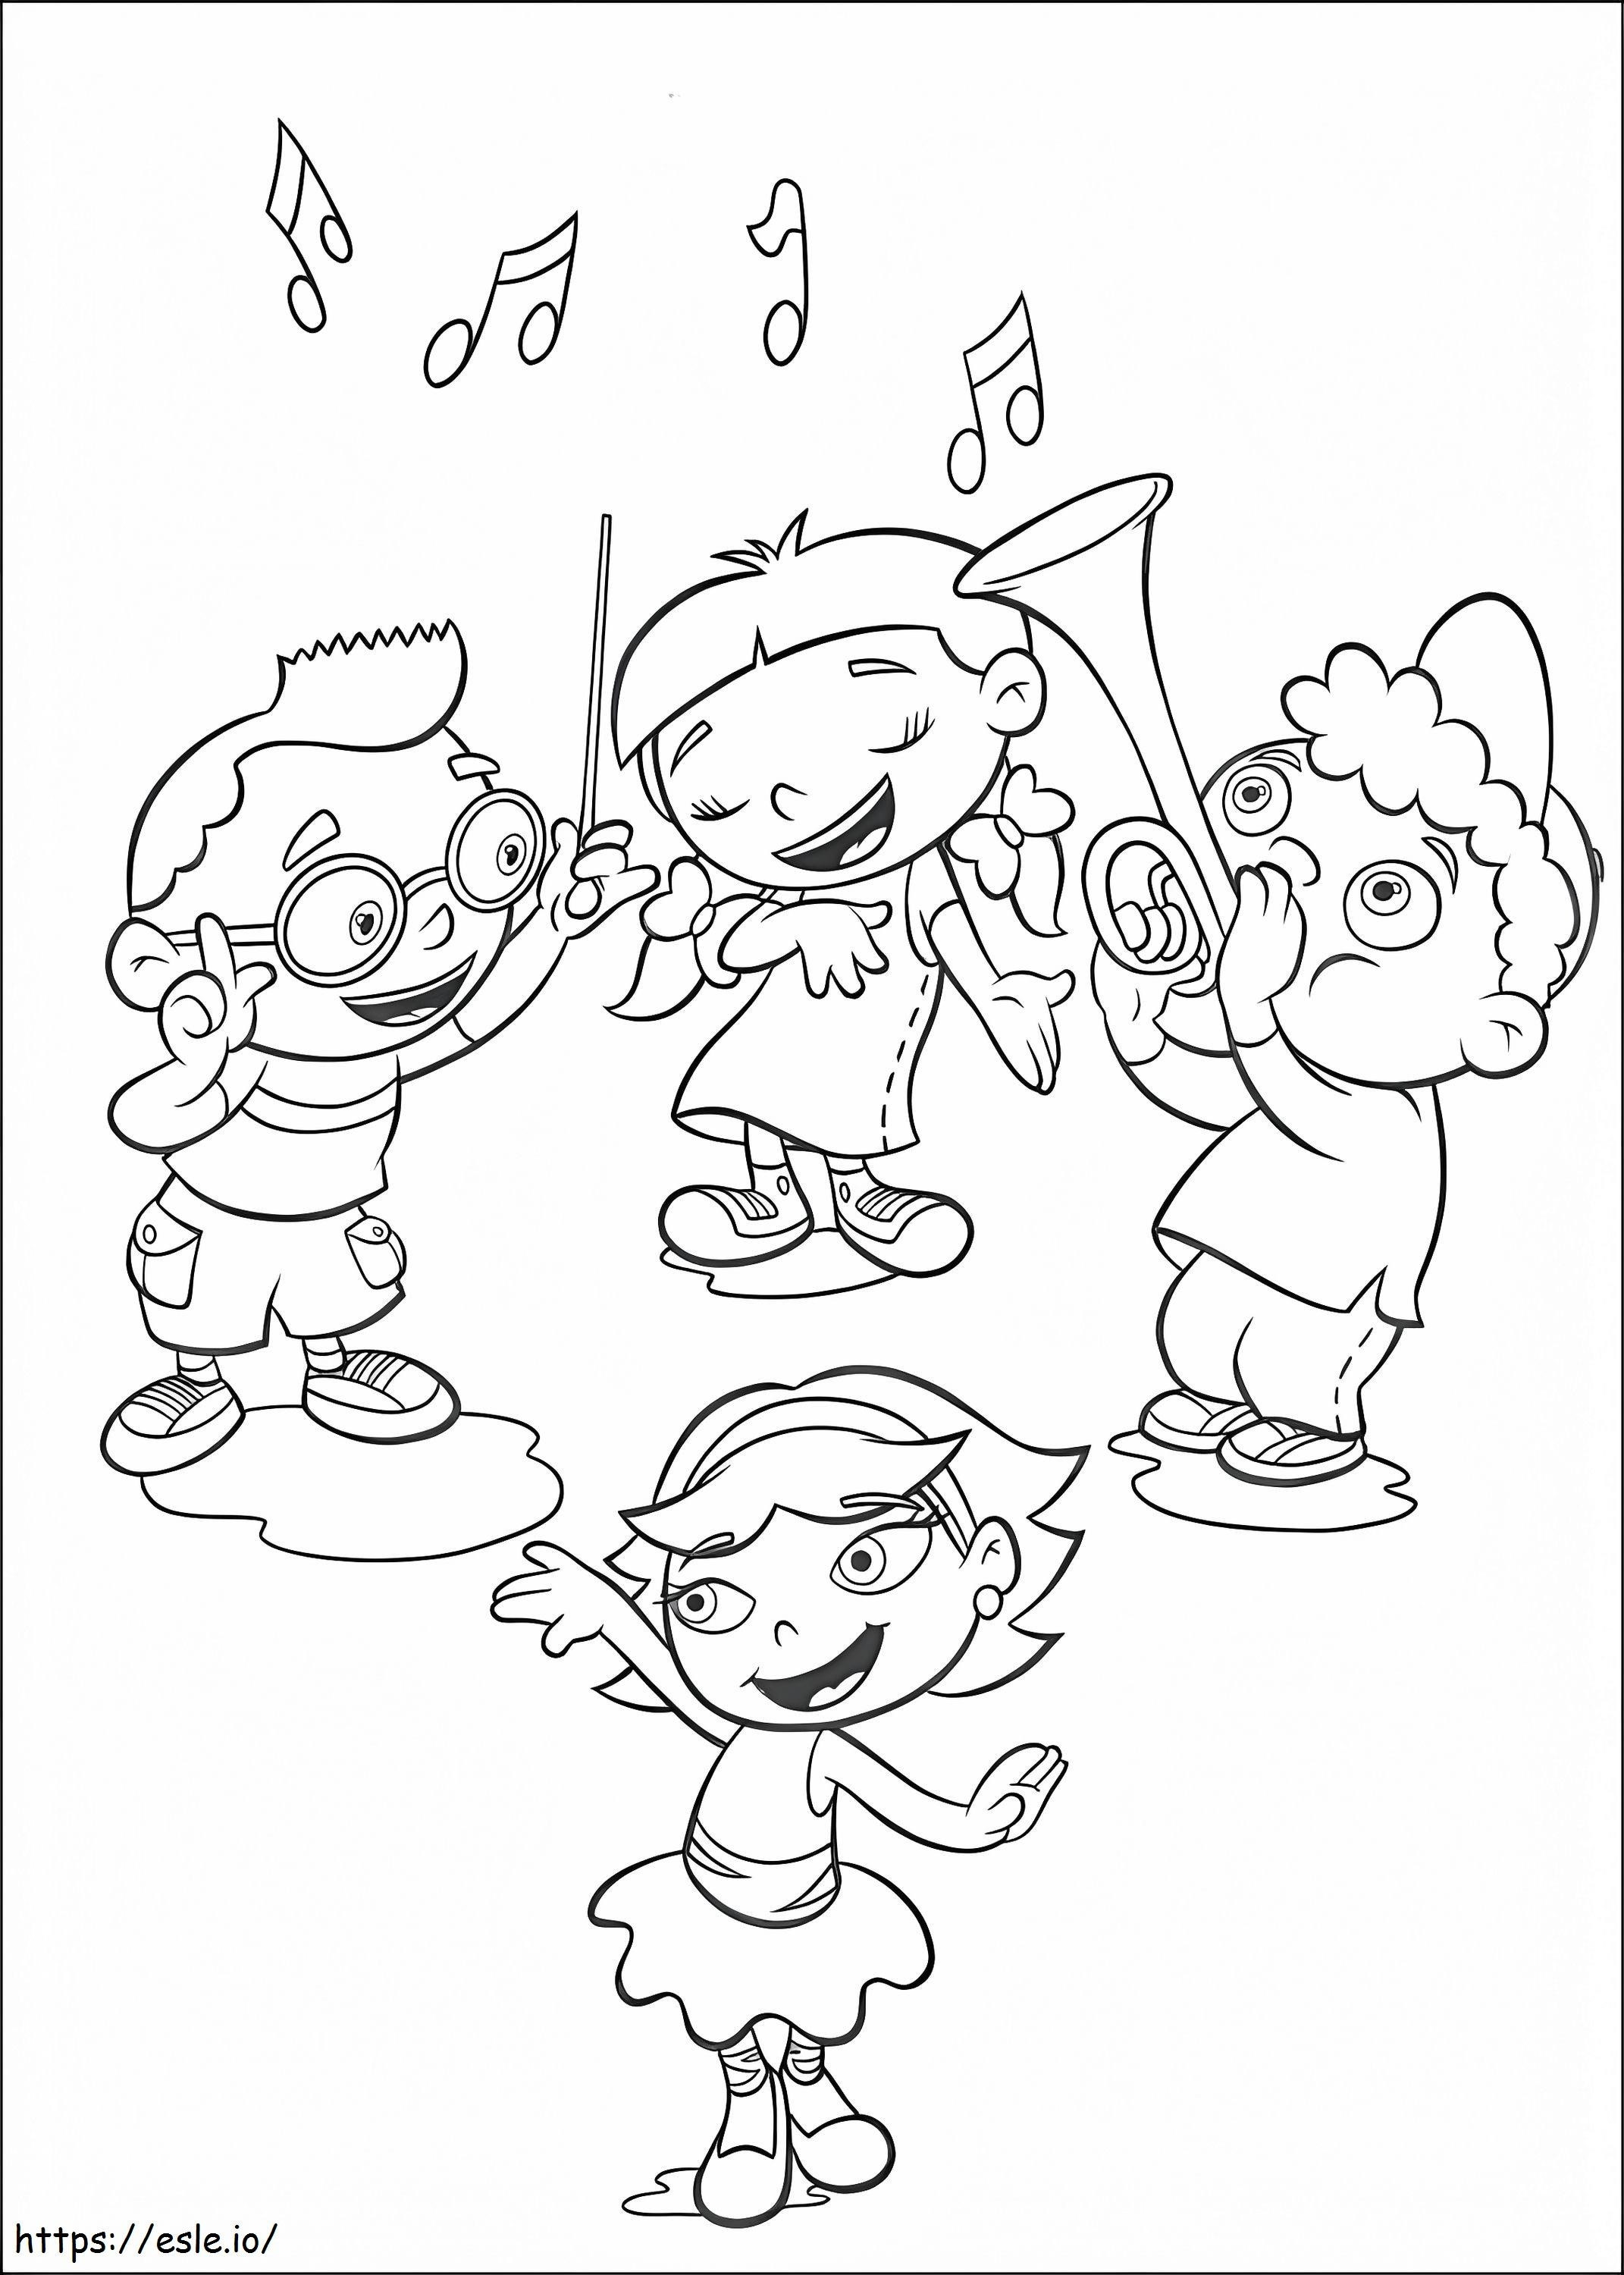 Little Einsteins 4 coloring page